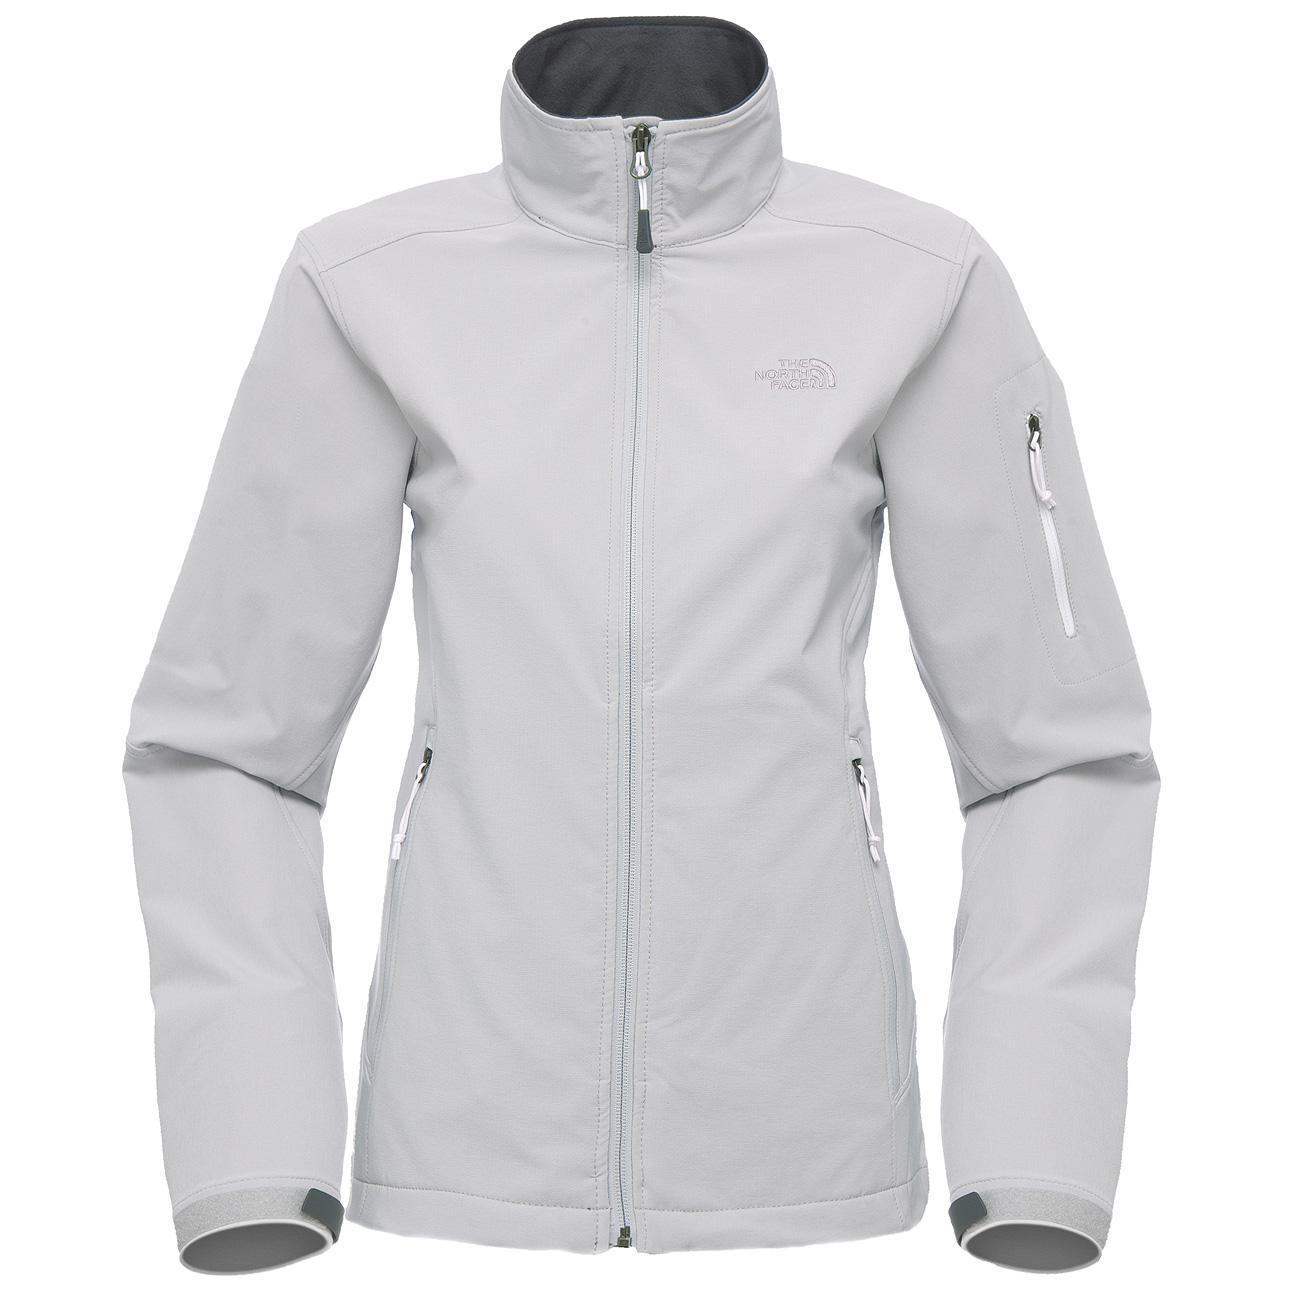 Foto Chaqueta Soft Shell The North Face Ceresio gris para mujer , xs foto 814997